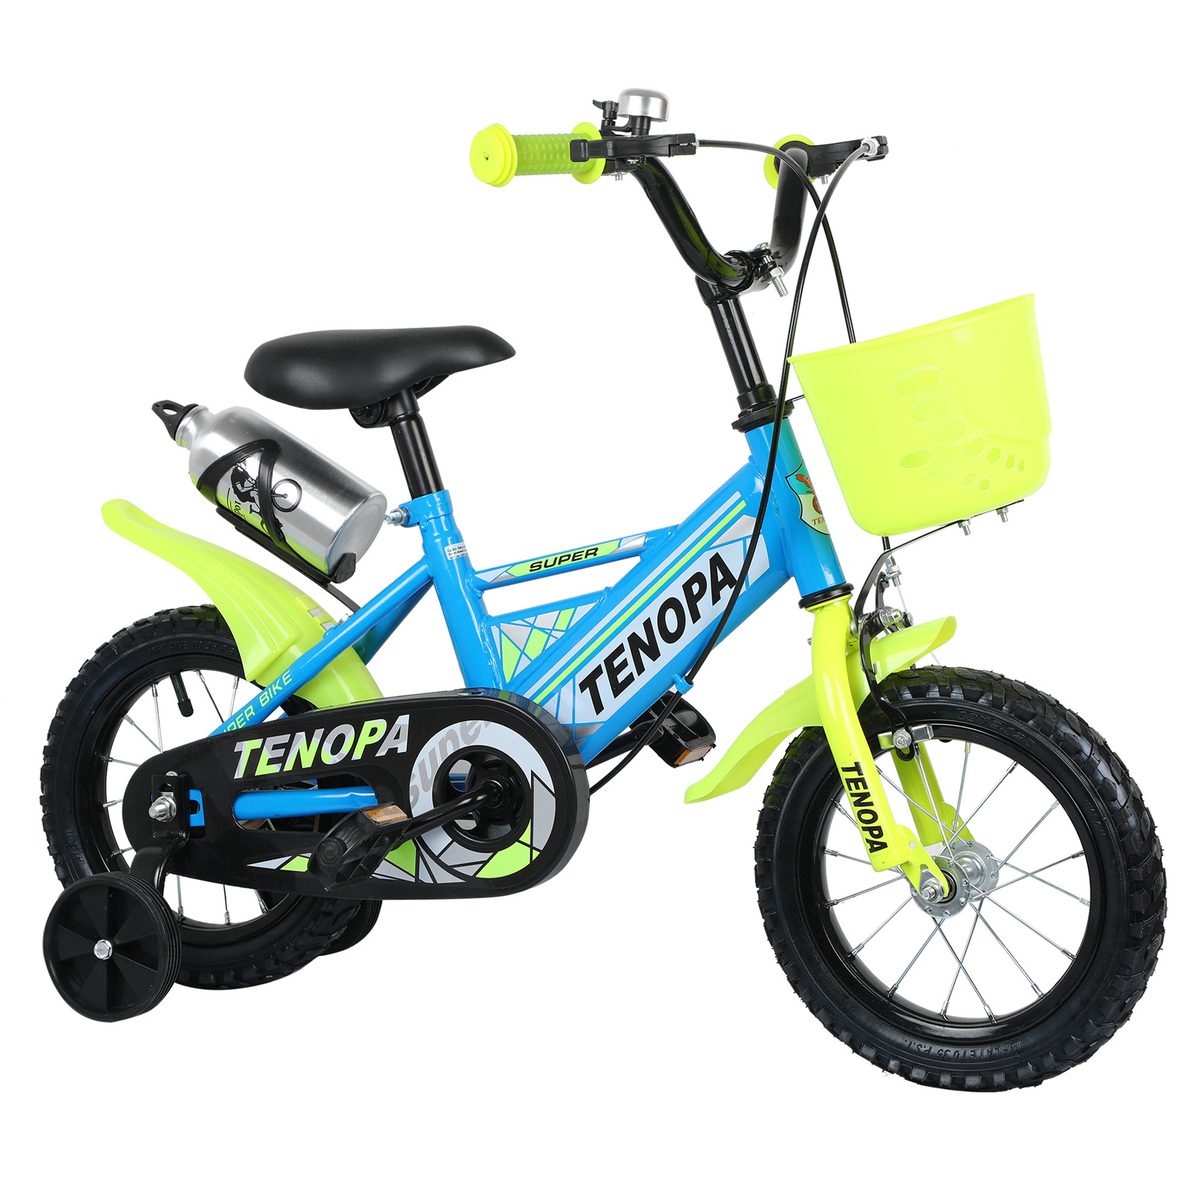 Tenopa Bicycle YSP1001 16 16" Assorted colors